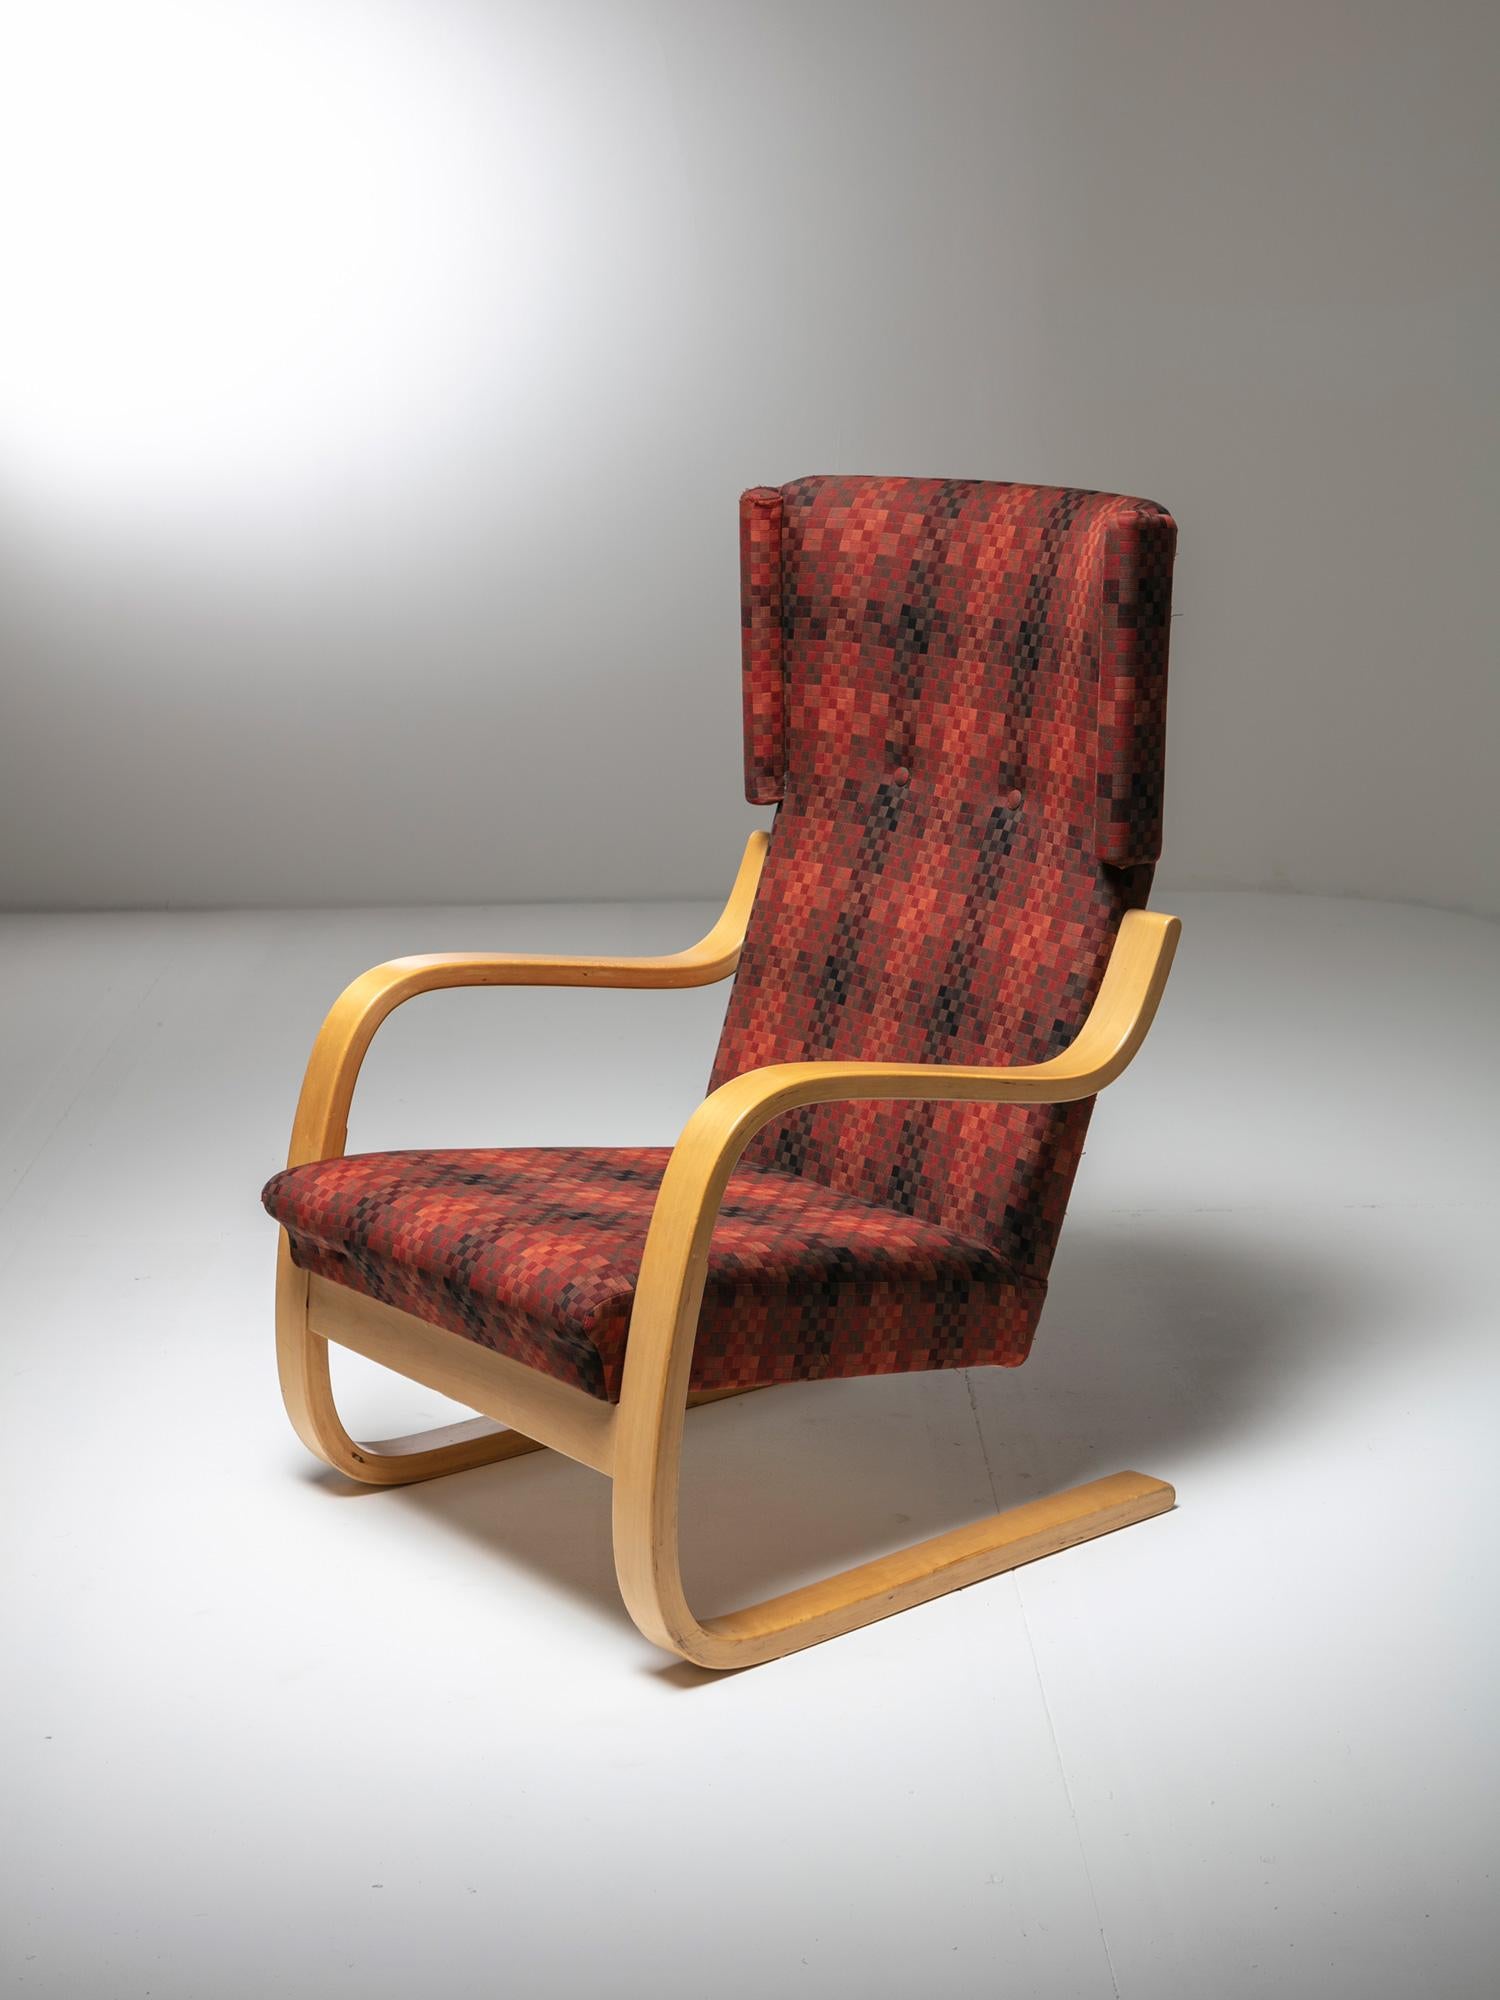 Pair of lounge chairs model 401 by Alvar Aalto for Artek.
Bent laminated birch frame and tartan fabric for this iconic pieces.